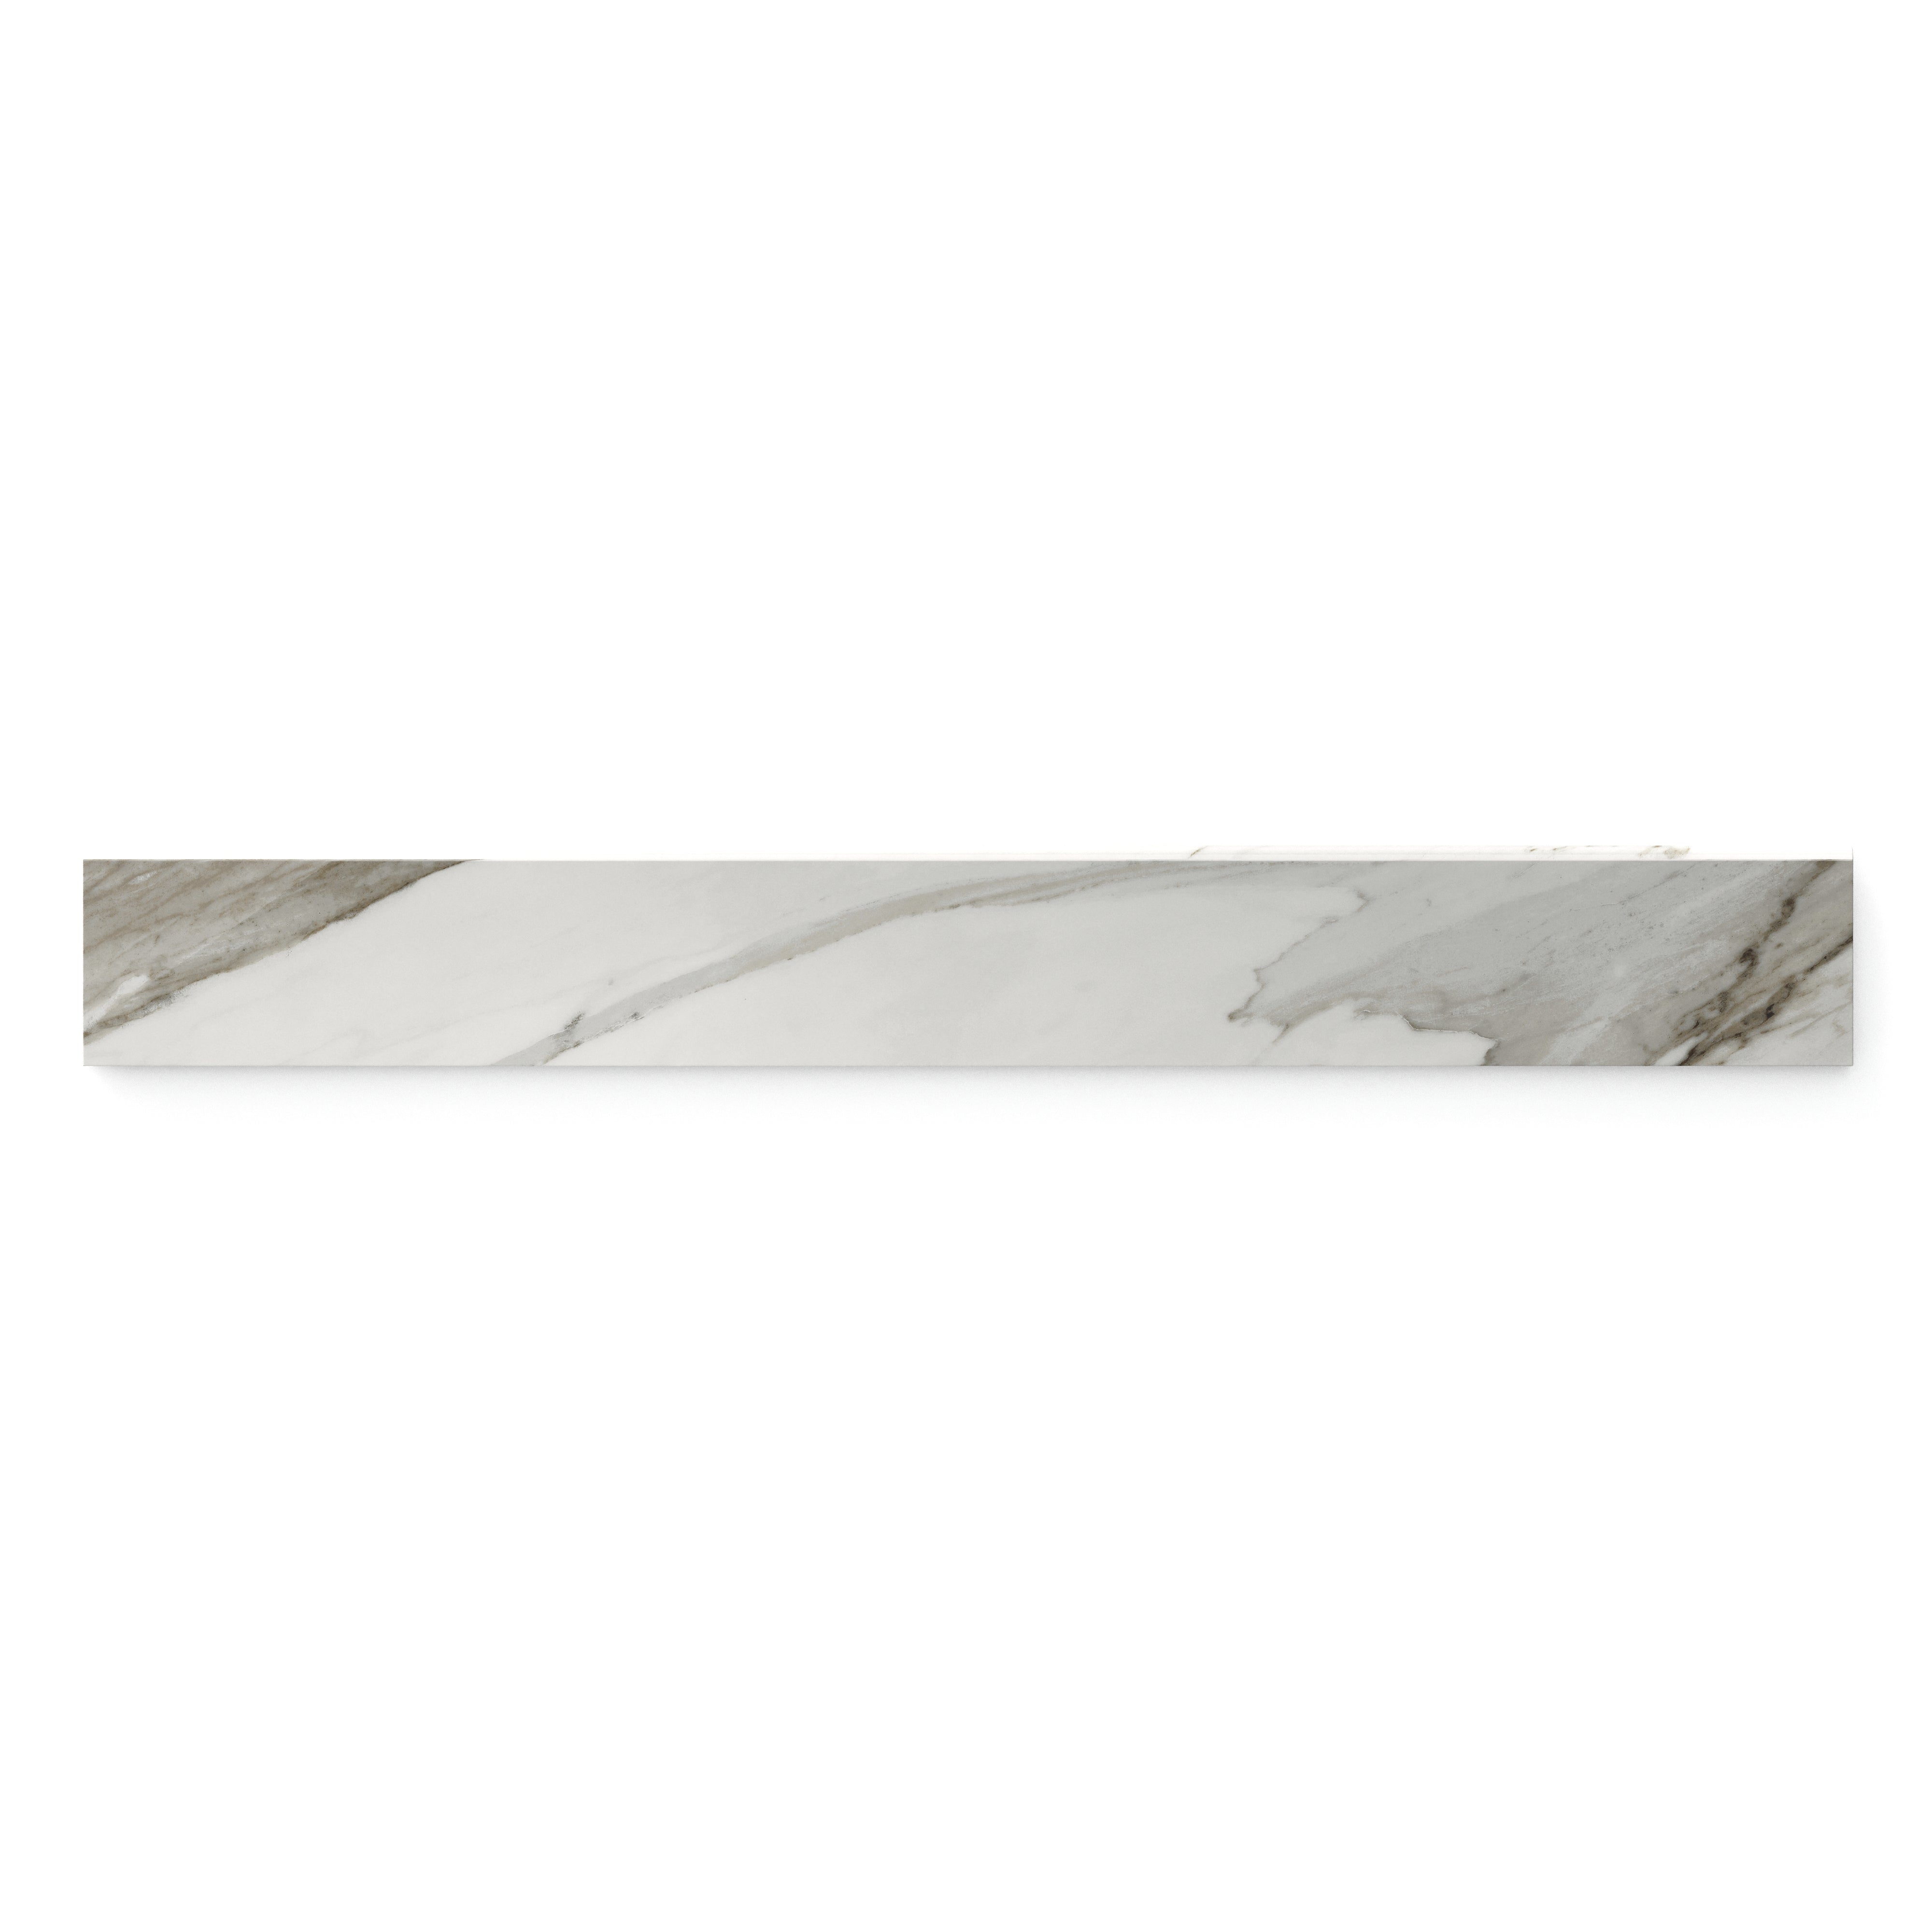 Chantel 3x24 Polished Porcelain Bullnose Tile in Apuano